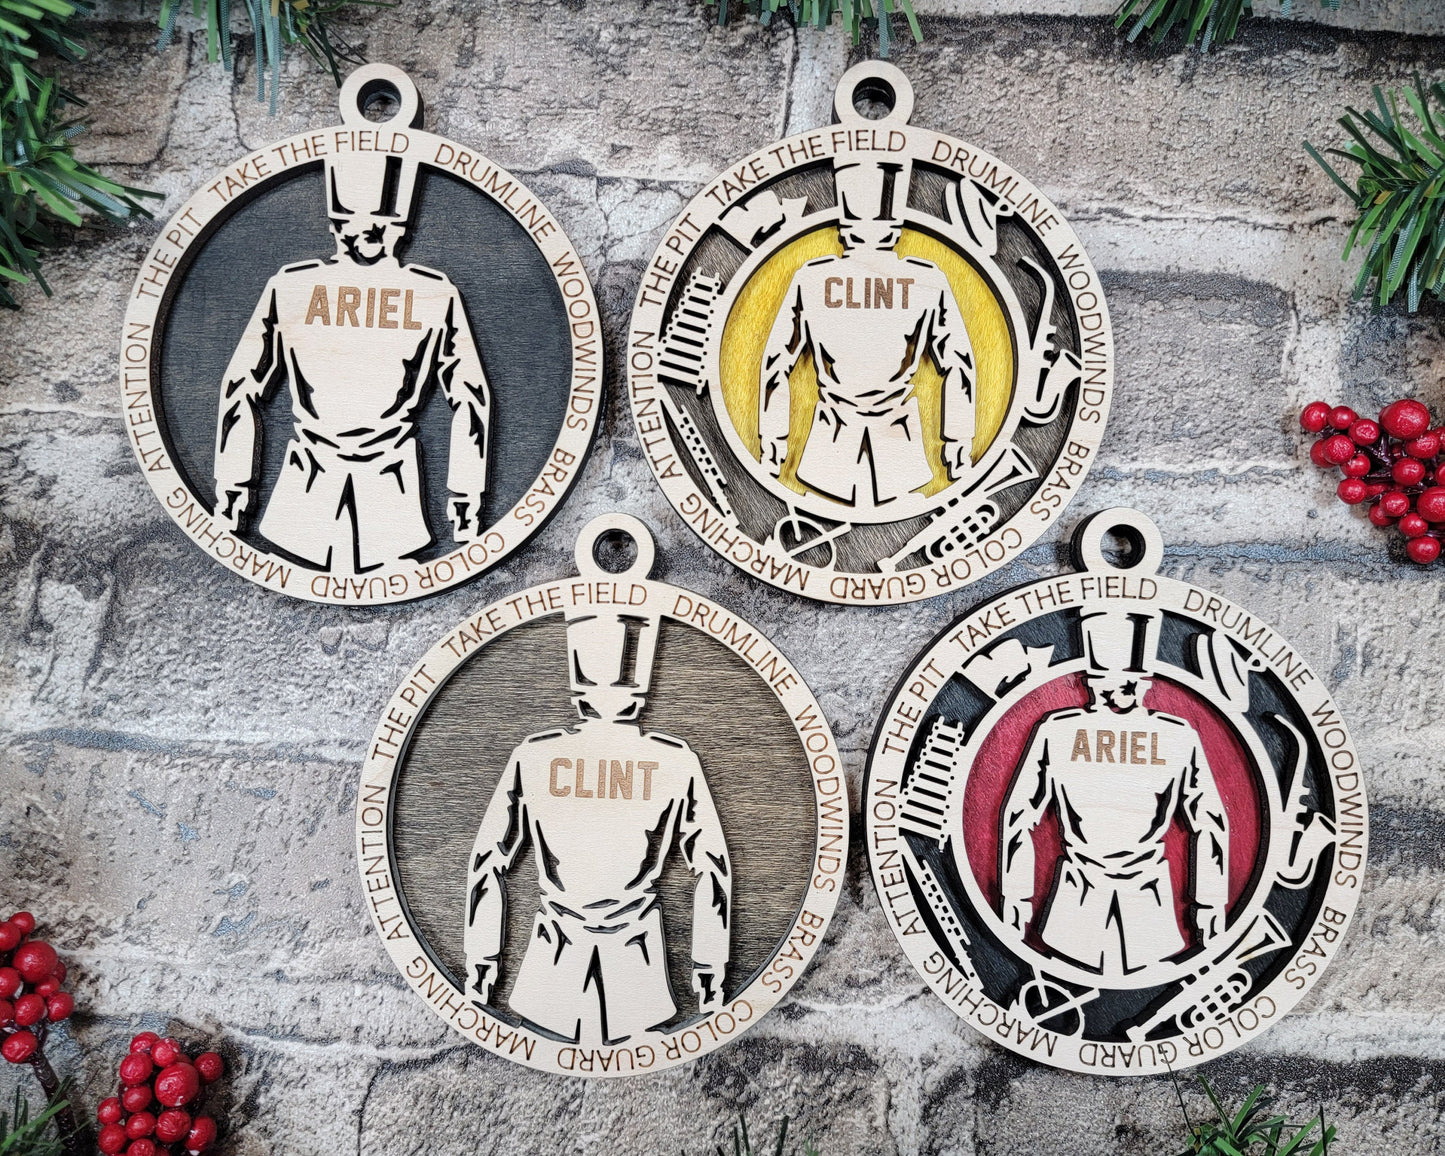 Marching Band Ornaments - Laser cut and engraved decorations